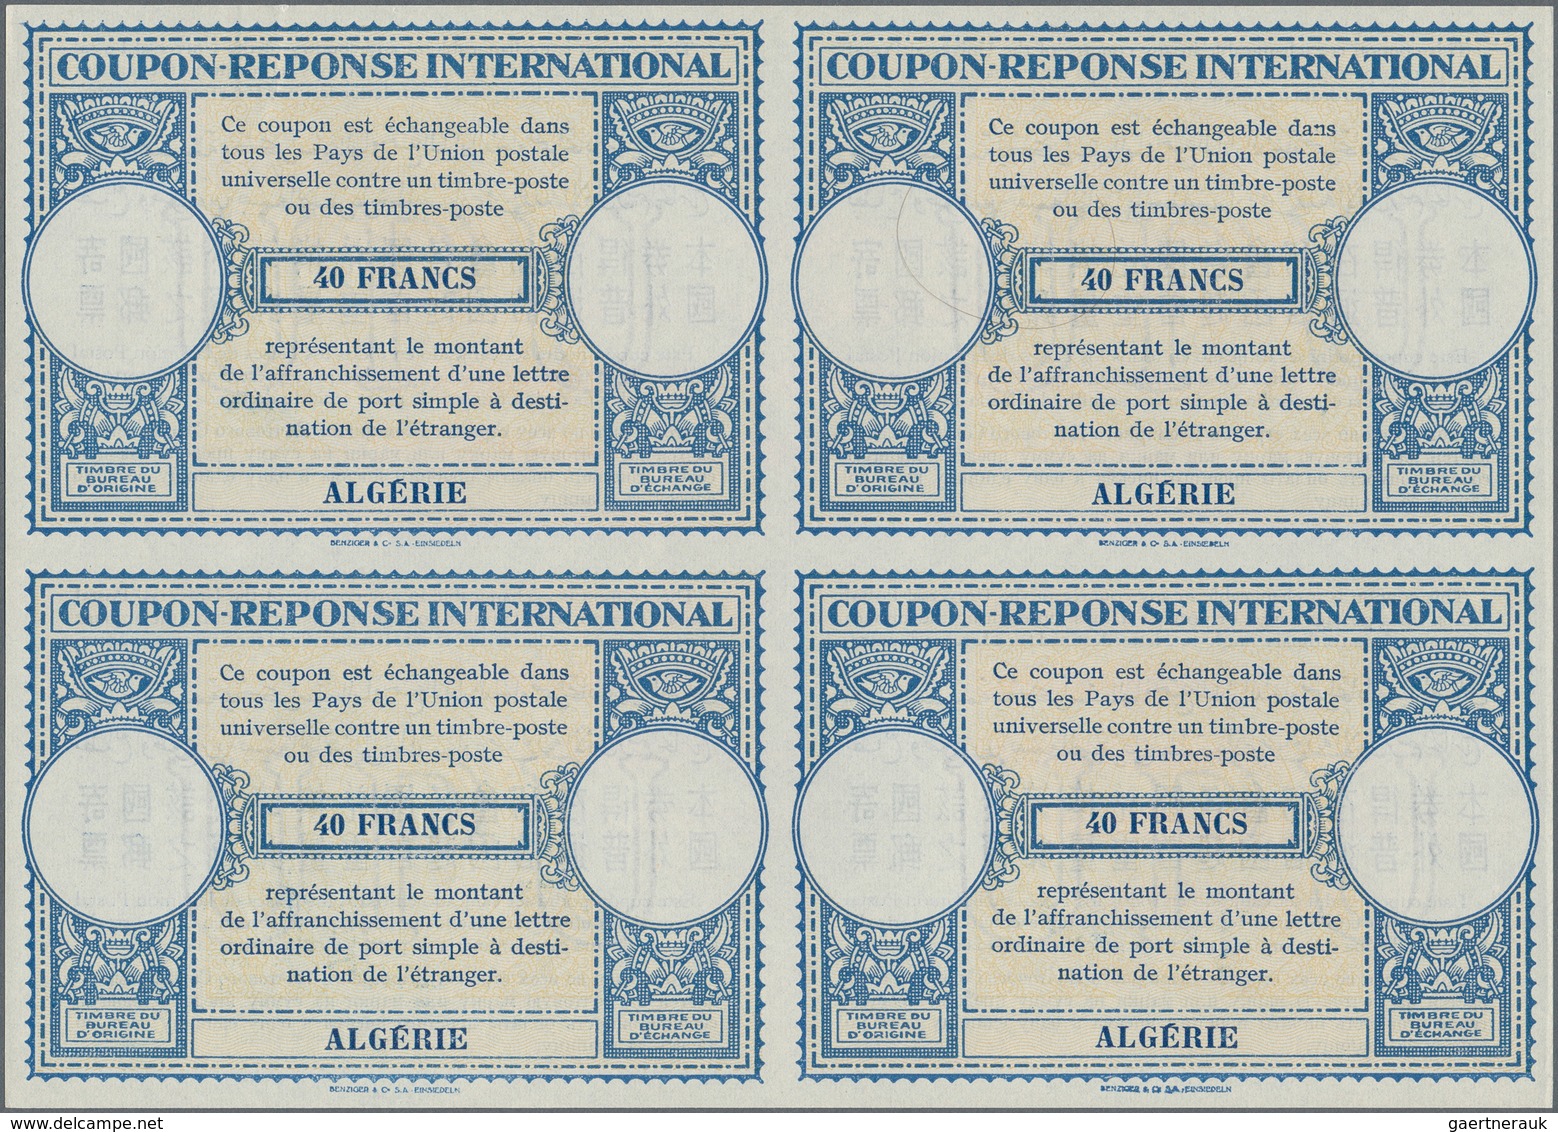 Algerien: 1950s (approx). International Reply Coupon 40 Francs (London Type) In An Unused Block Of 4 - Briefe U. Dokumente